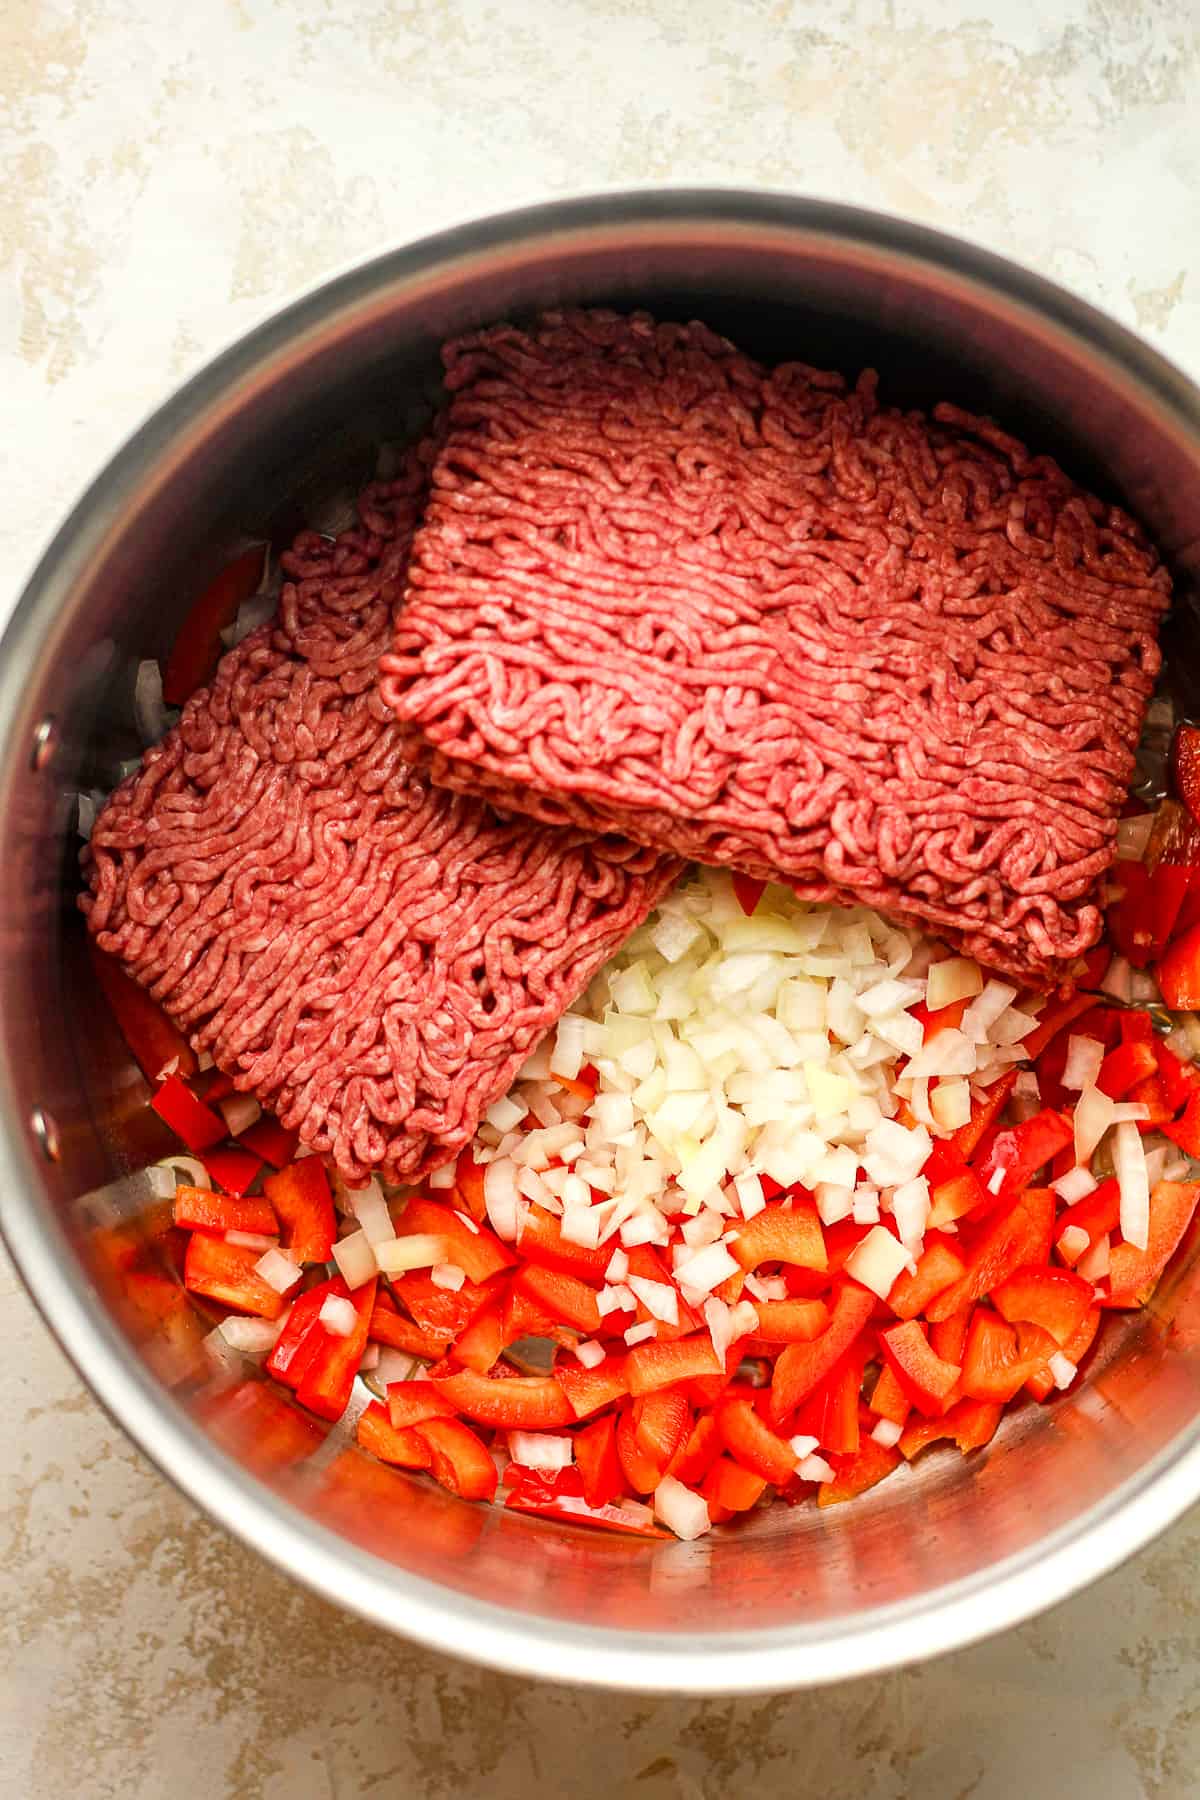 A pot of the onions, bell peppers, and raw ground beef.